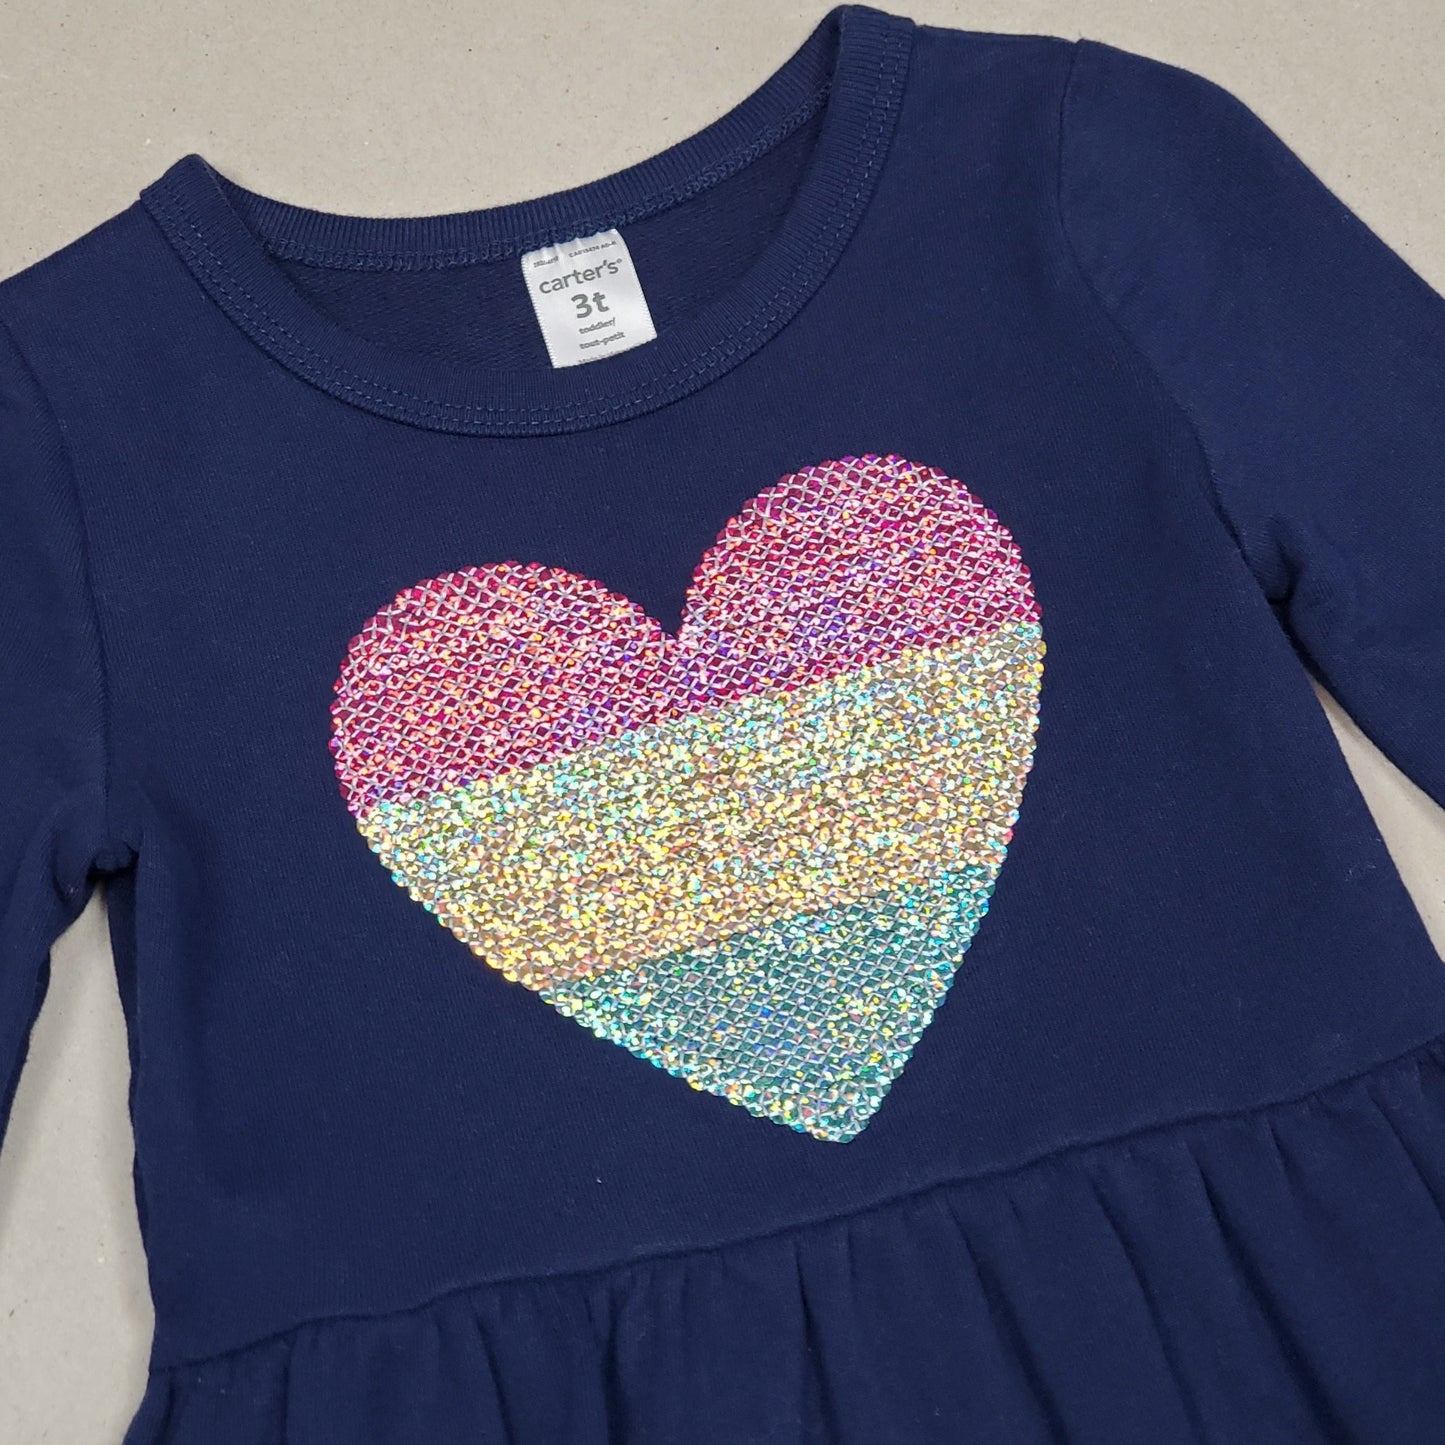 Carters Girls Navy Blue Sequence Heart Dress 3T Used View 3